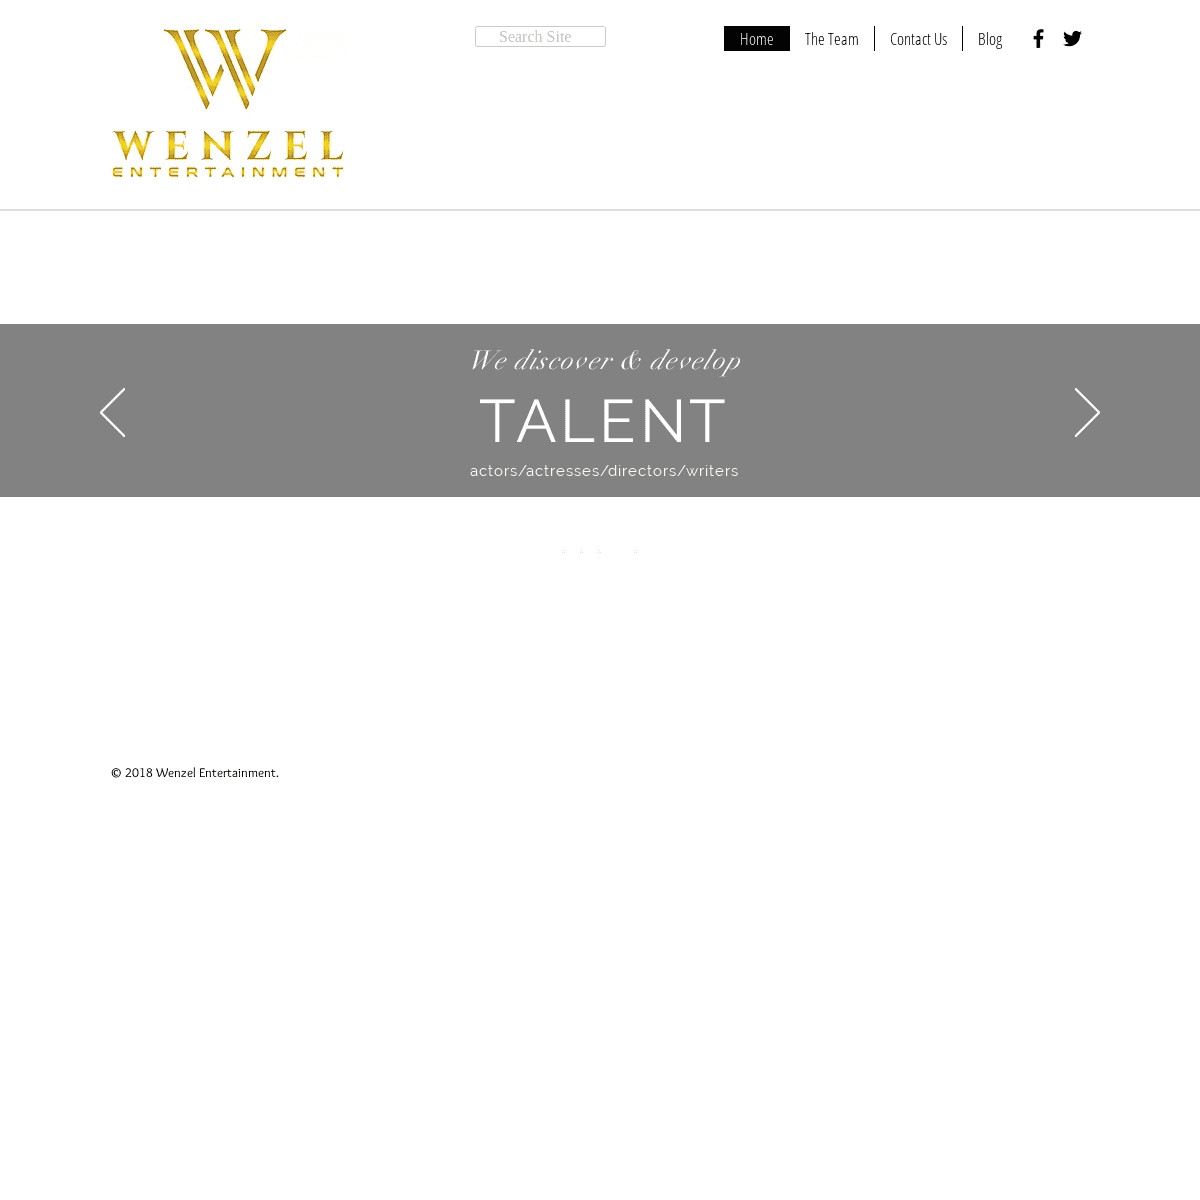 A complete backup of wenzelentertainment.com